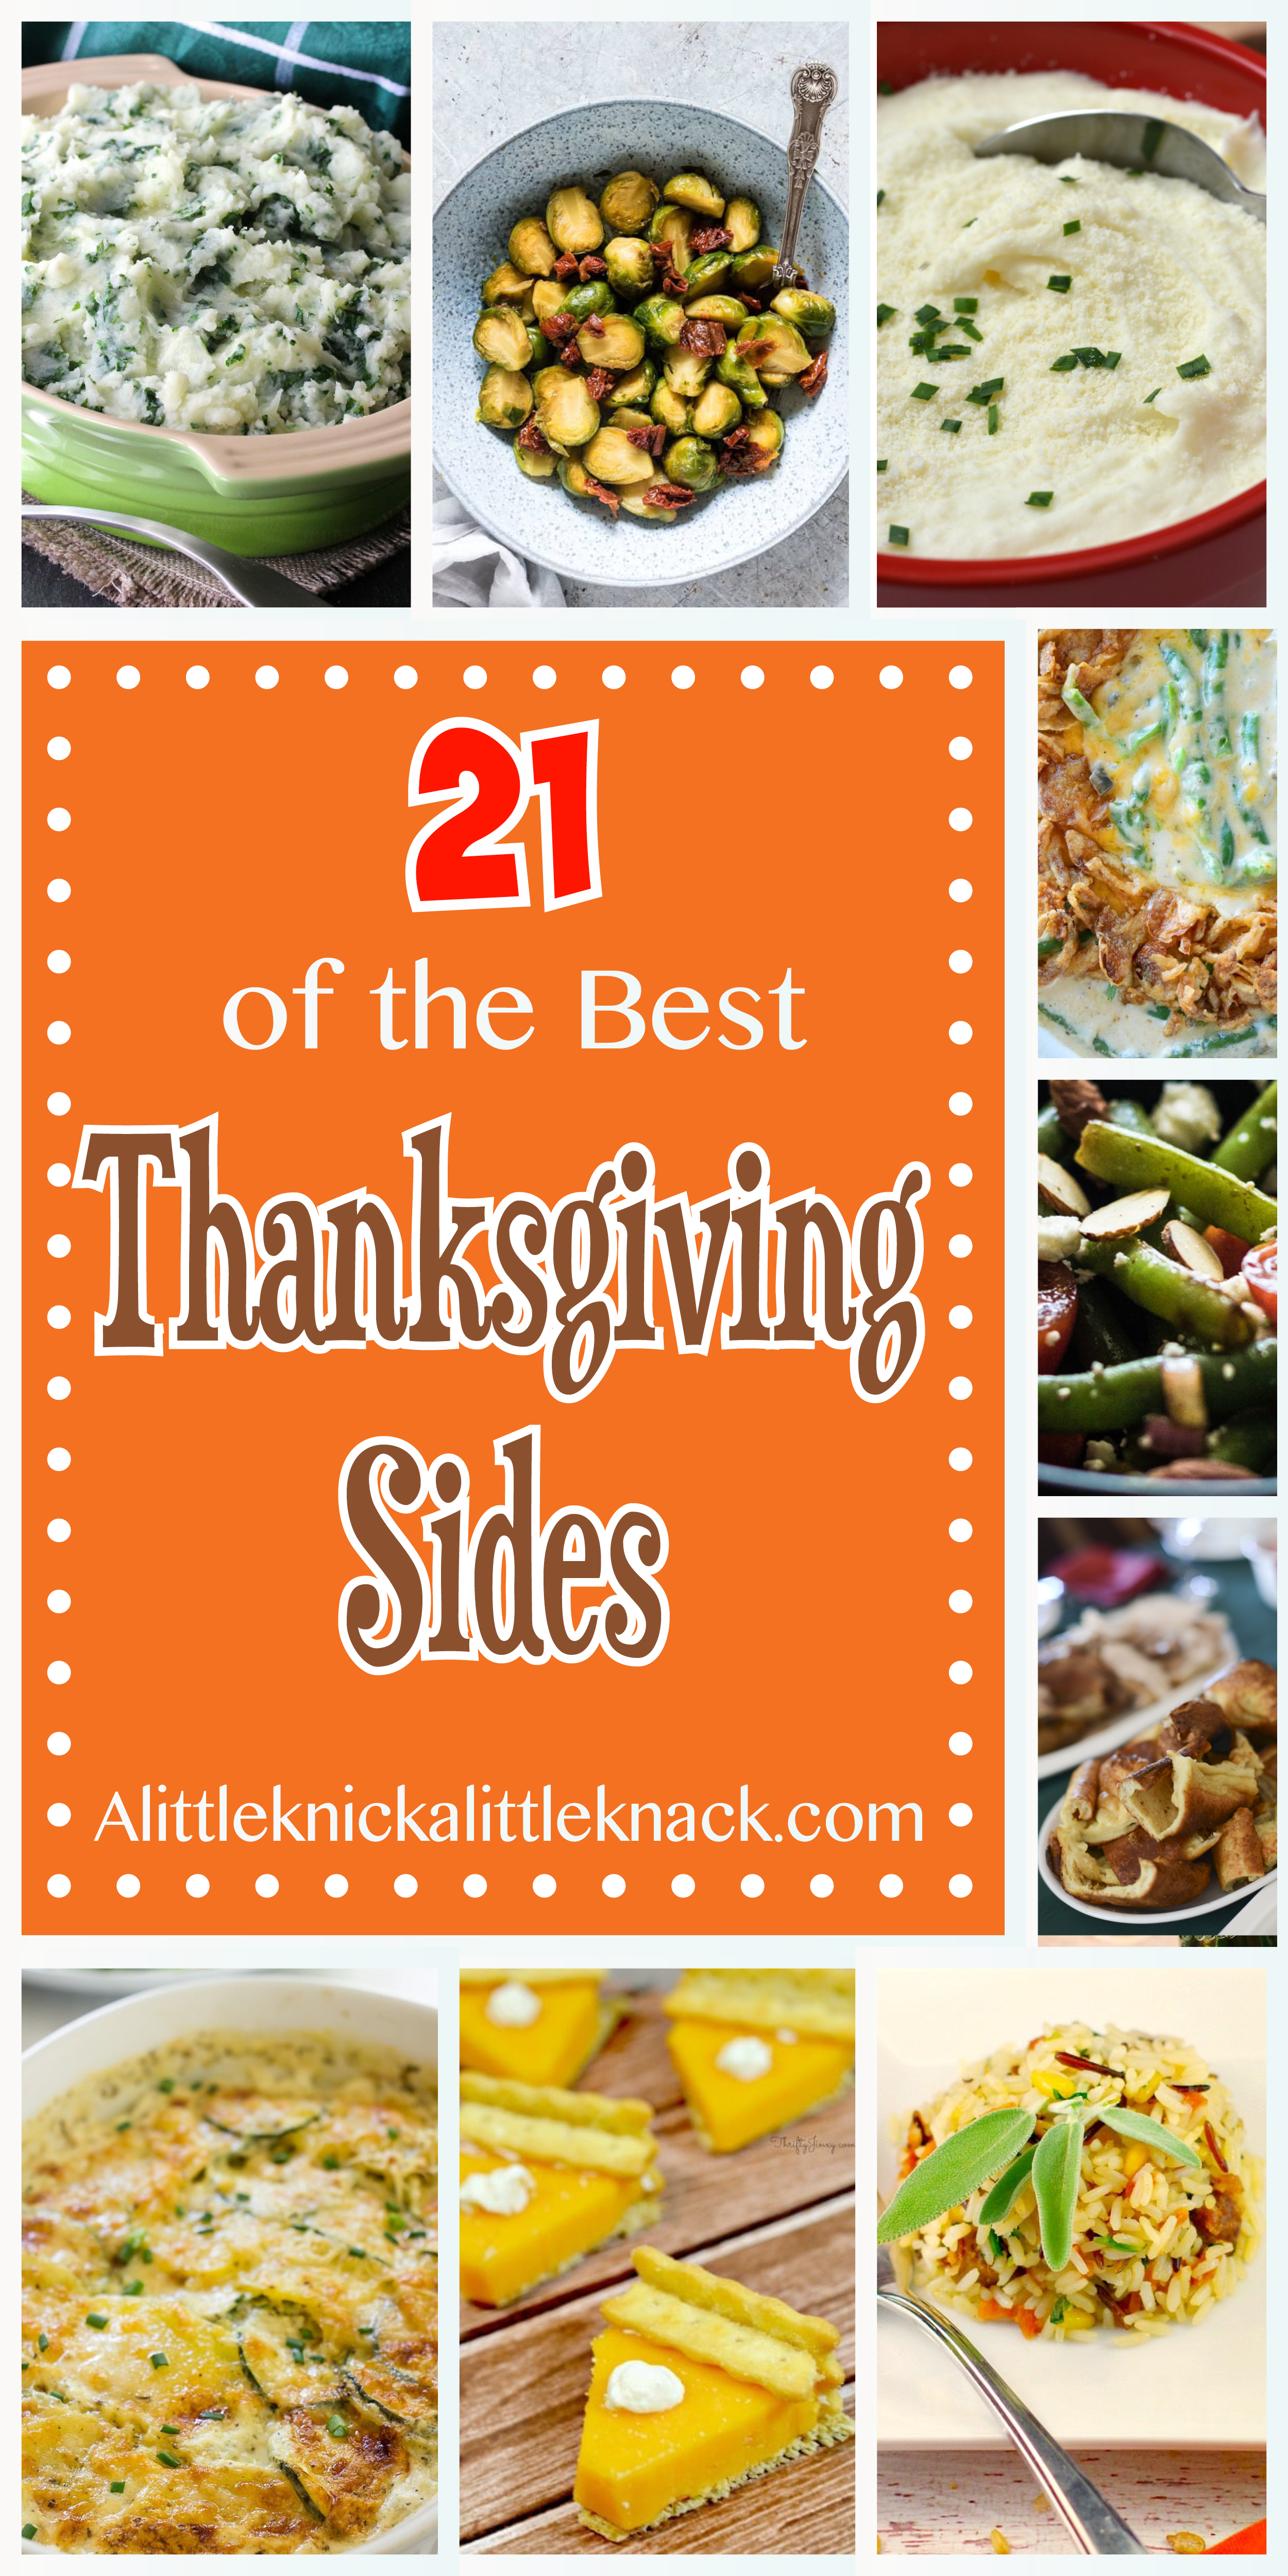 From cheesy mashed potatoes to green bean casserole these 21 side dishes are sure to make your Thanksgiving stand out! #sidedish